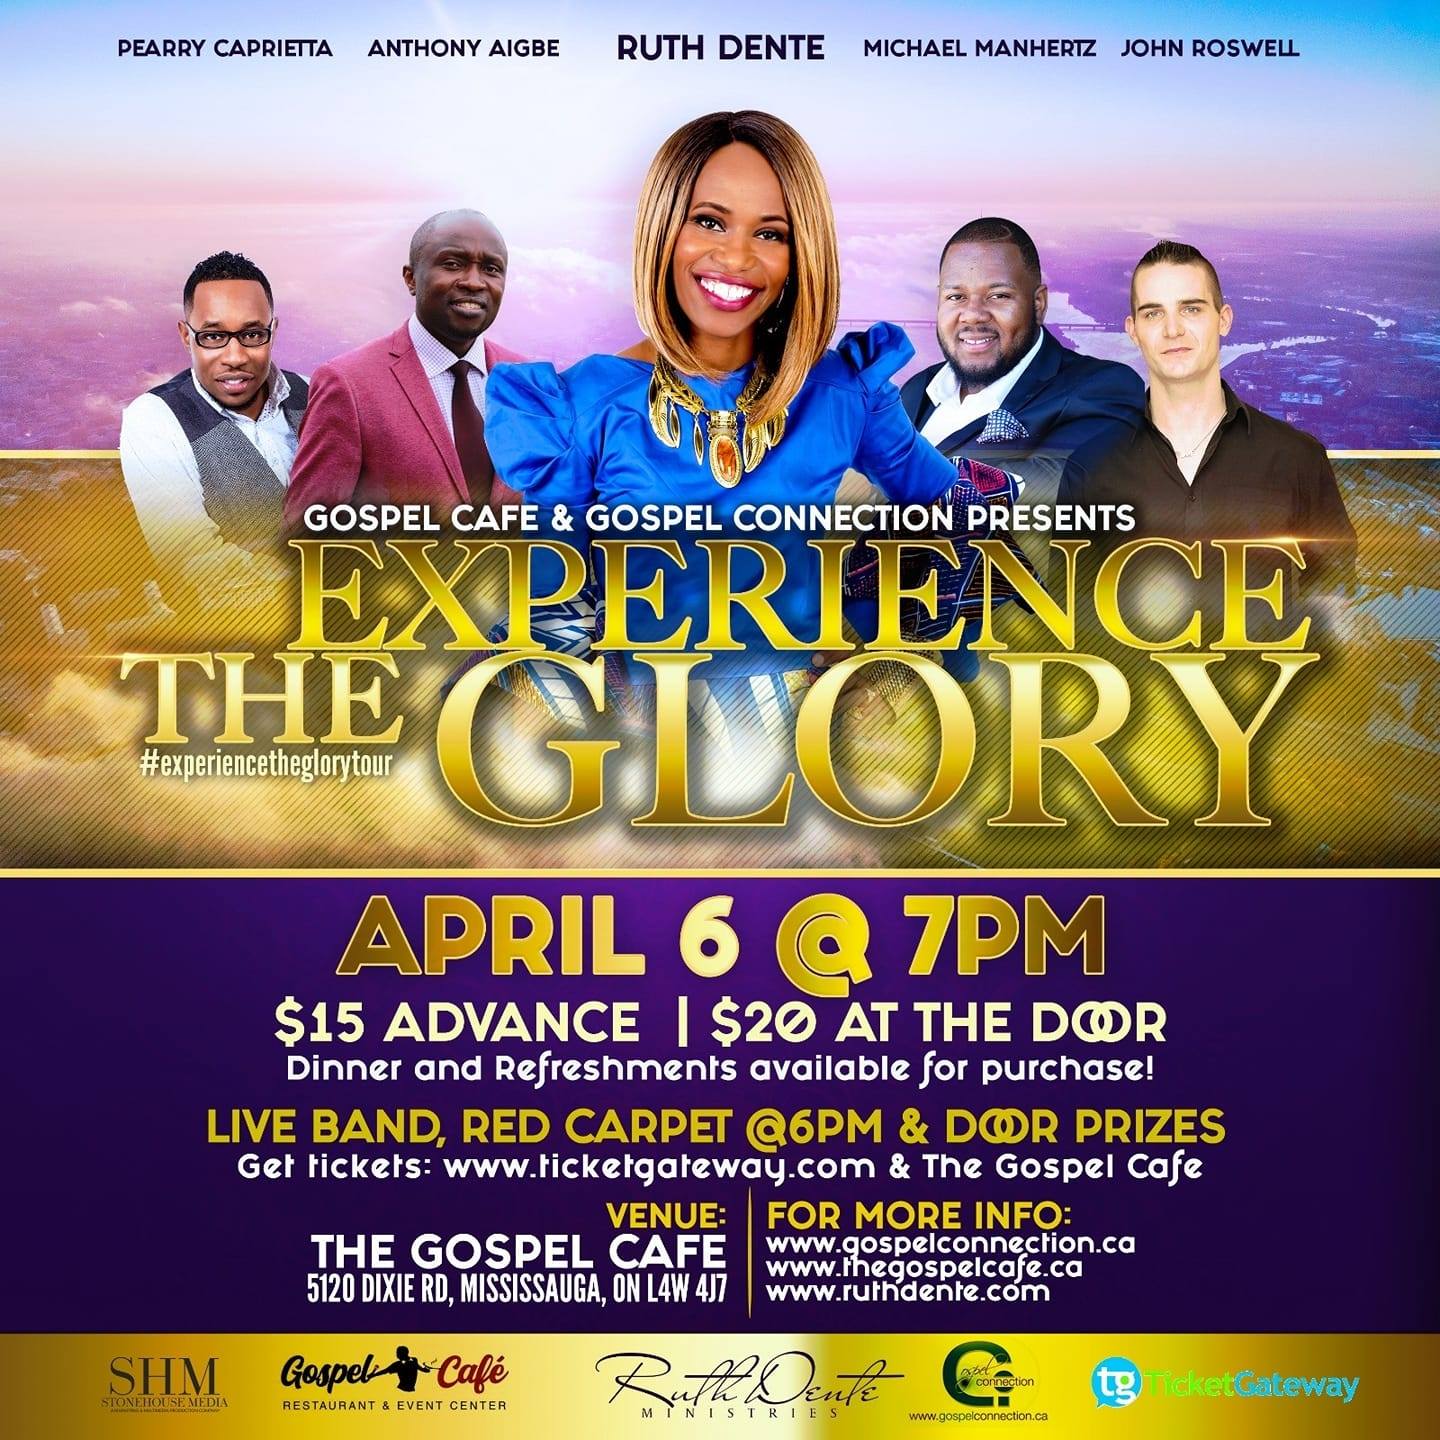 Pastor Ruth Dente concert "the Glory"